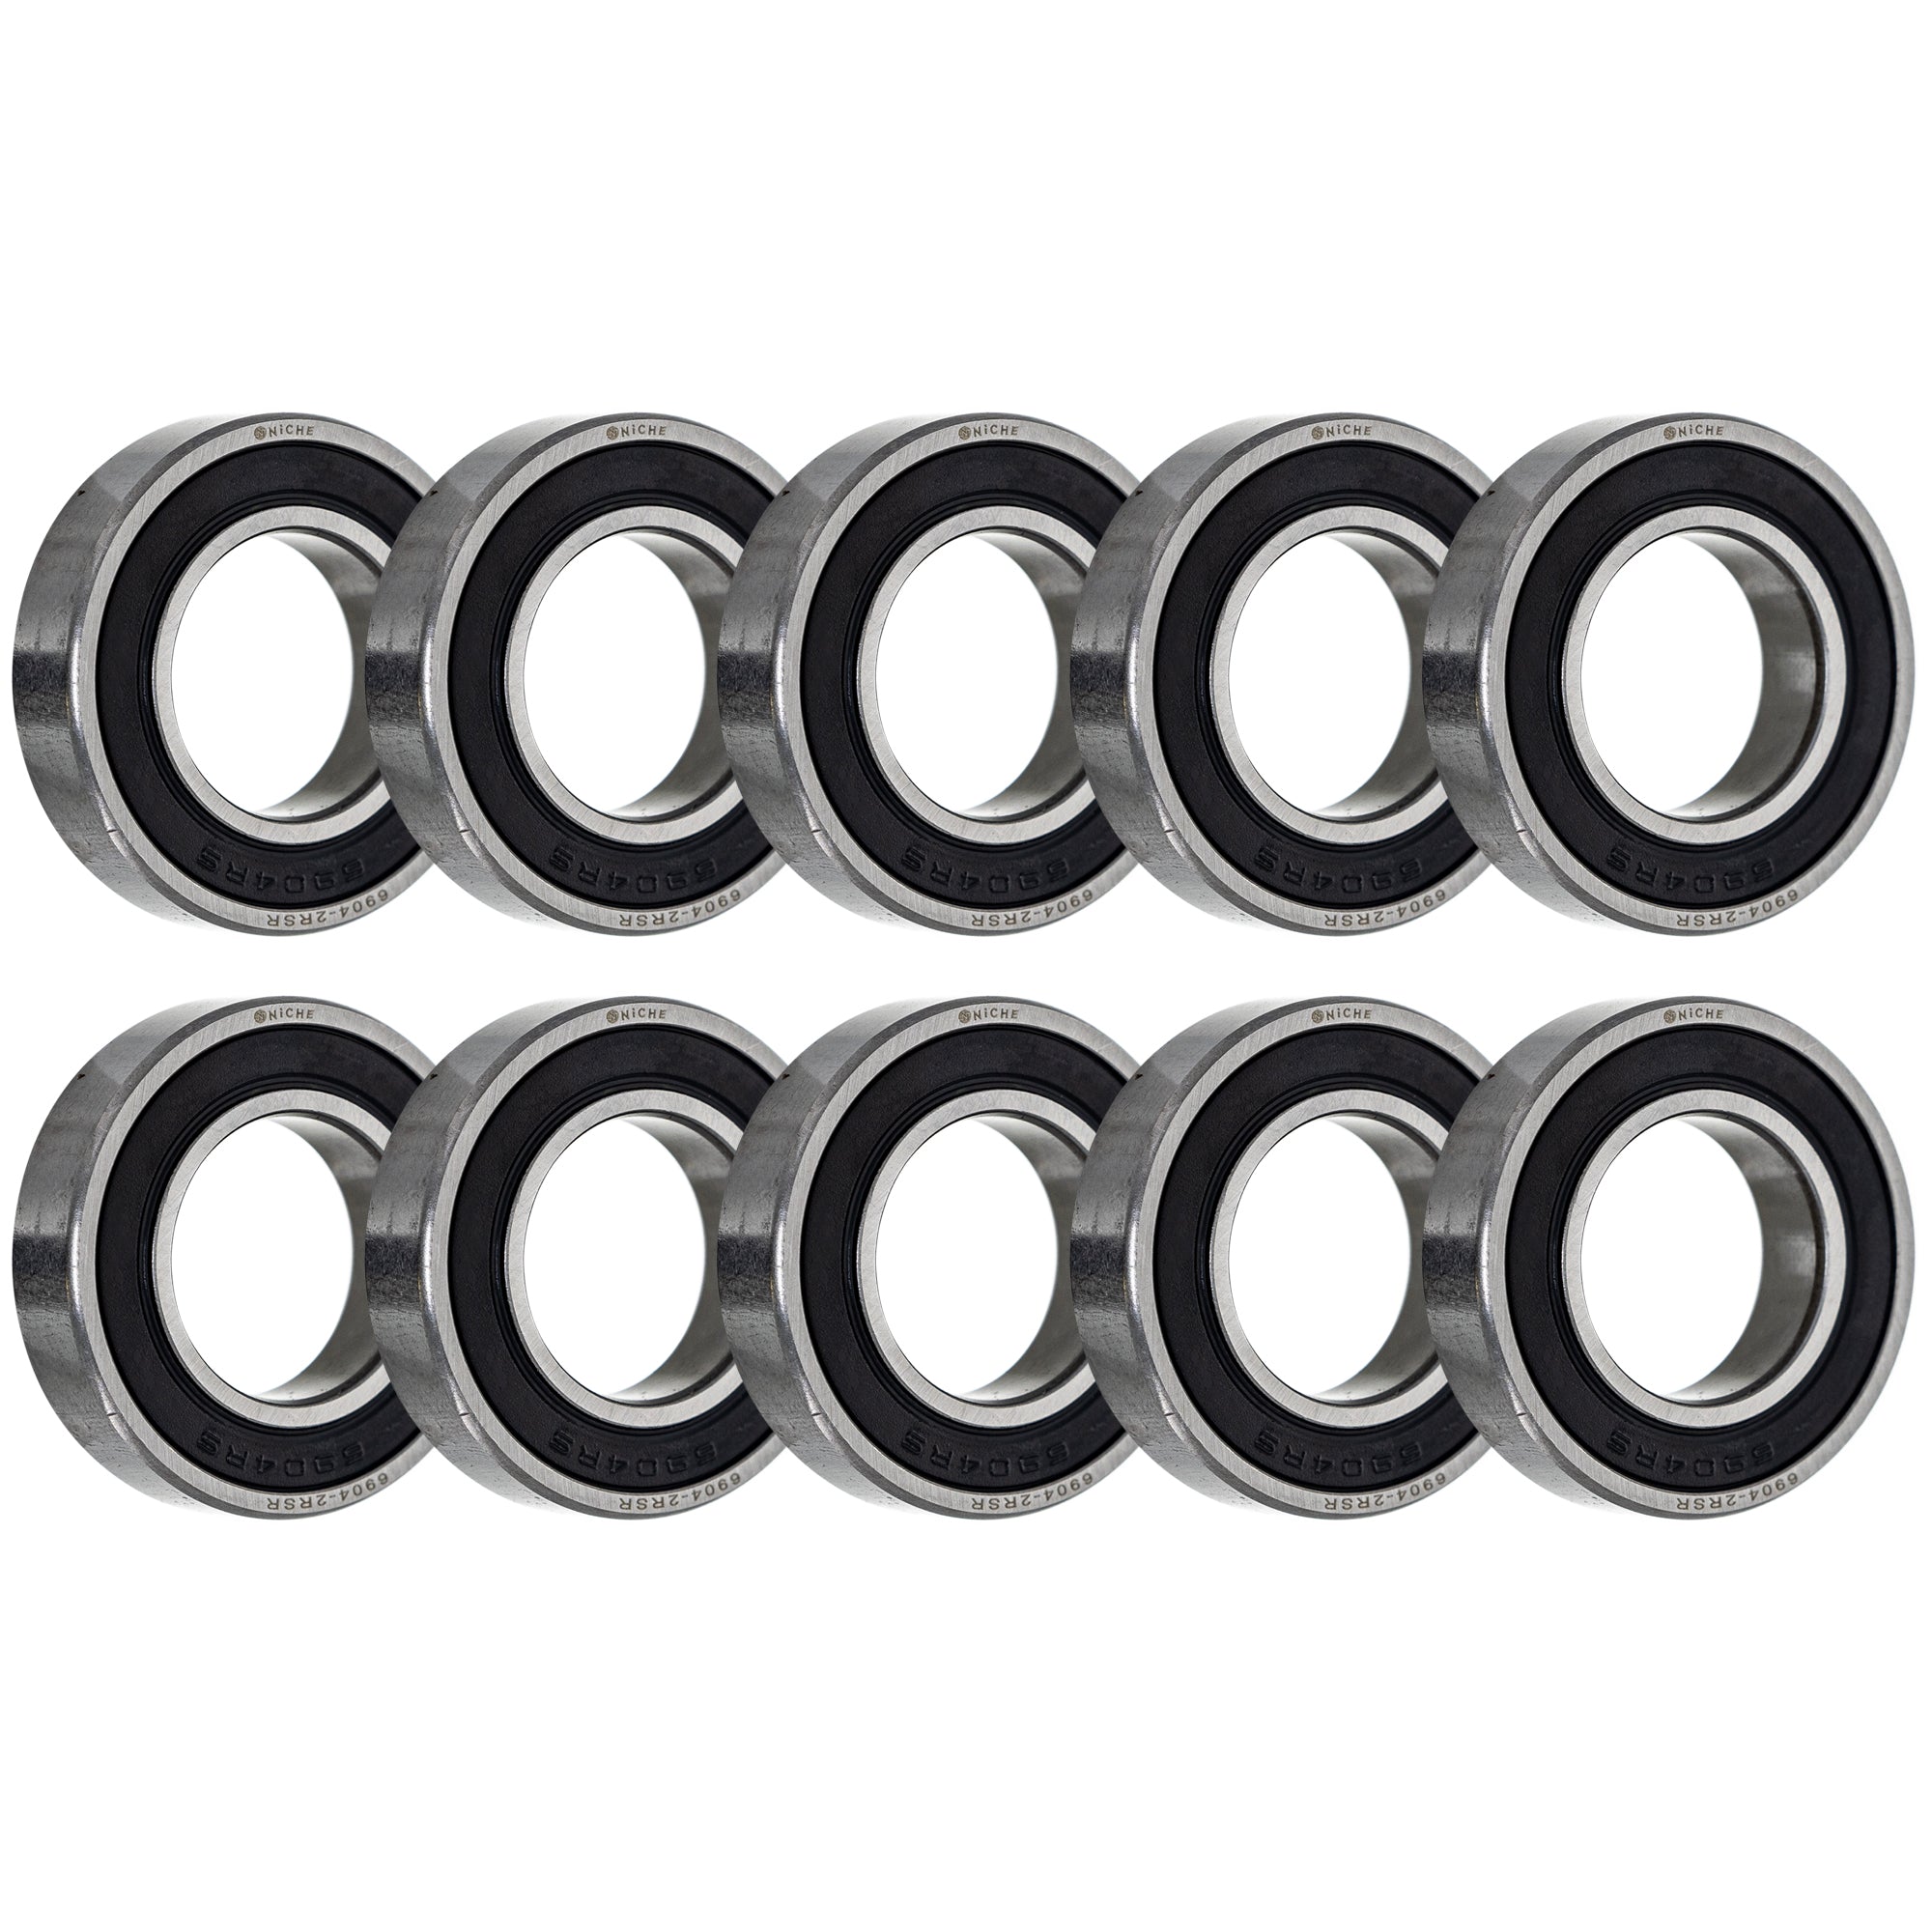 Single Row, Deep Groove, Ball Bearing Pack of 10 10-Pack for zOTHER WR450F WR426F WR400F NICHE 519-CBB2287R